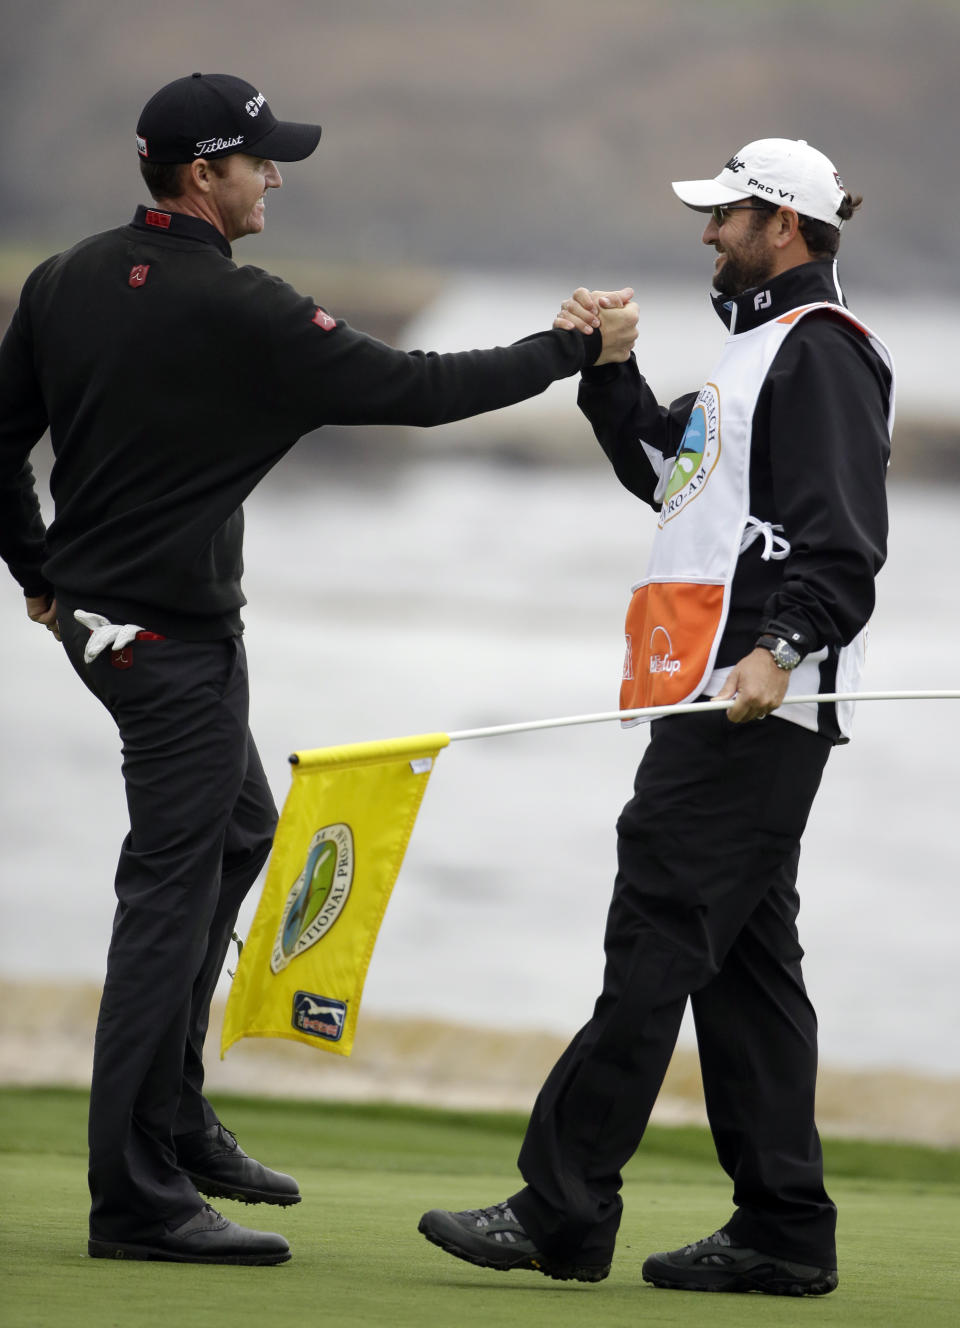 Jimmy Walker, left, celebrates with his caddie Andy Sanders on the 18th green on Sunday, Feb. 9, 2014, after winning the AT&T Pebble Beach Pro-Am golf tournament in Pebble Beach, Calif. (AP Photo/Eric Risberg)